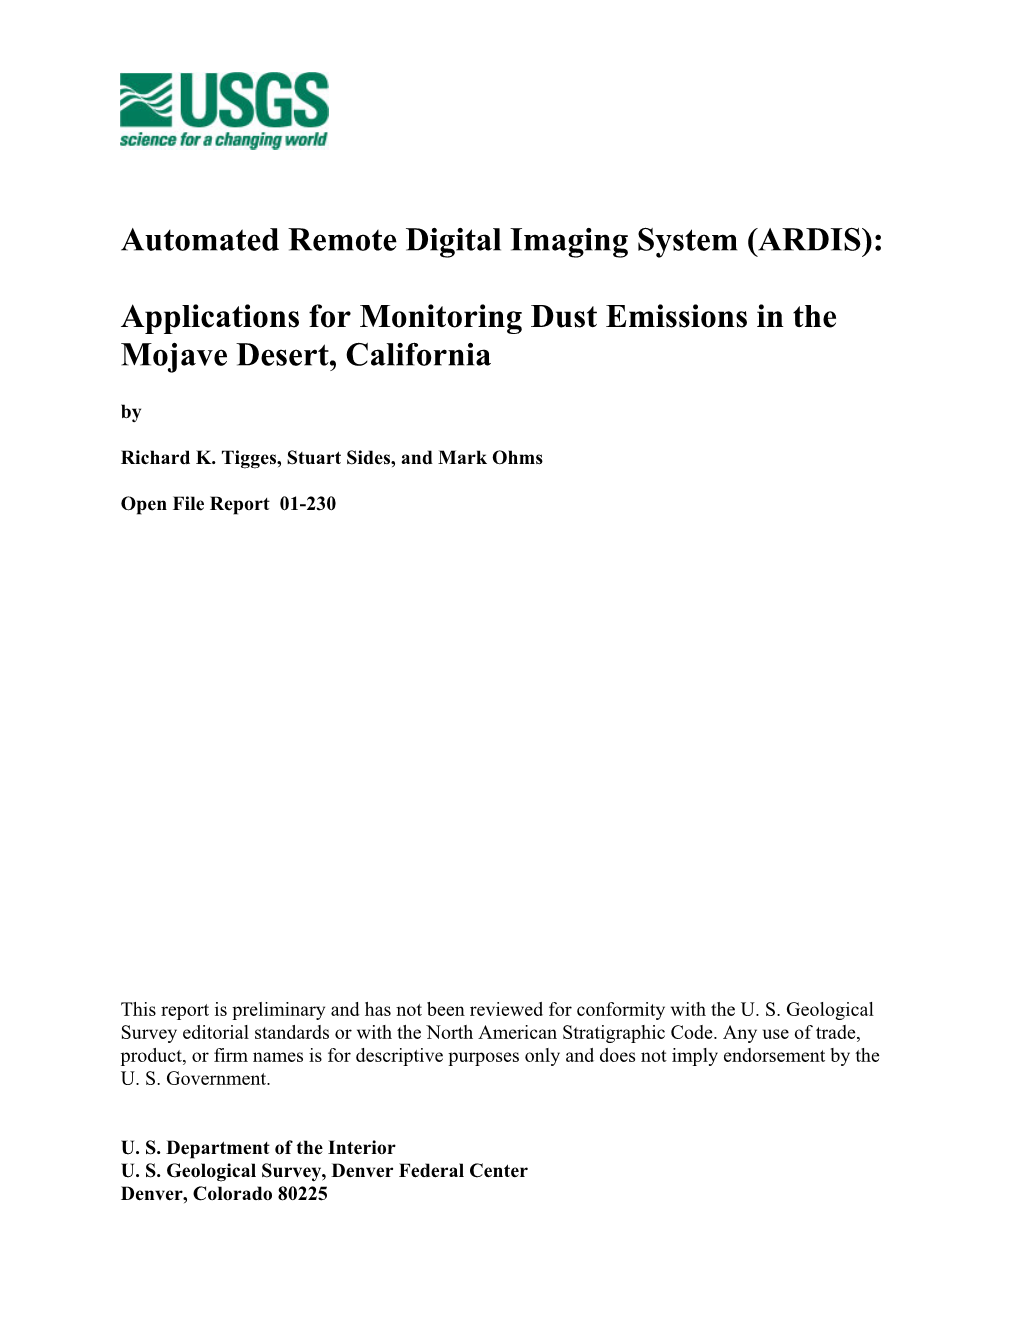 Automated Remote Digital Imaging System (ARDIS): Applications for Monitoring Dust Emissions in the Mojave Desert, California